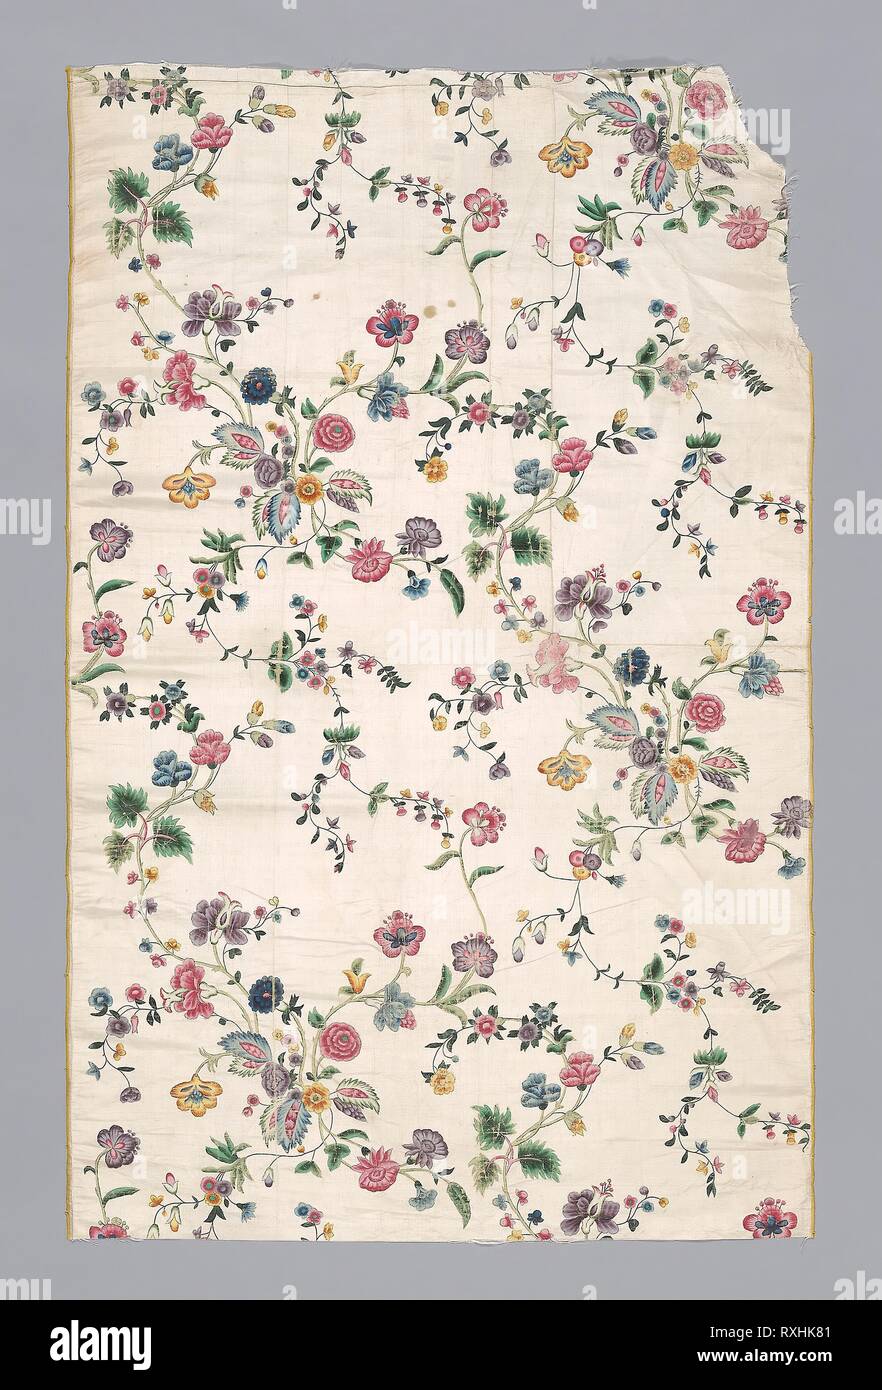 Panel (Dress Fabric). Made in China for the European/American market. Date: 1701-1725. Dimensions: 116.9 × 74 cm (46 × 29 1/8 in.)  Warp repeat: 60.7 cm (23 7/8 in.). Silk, plain weave; painted. Origin: China. Museum: The Chicago Art Institute. Stock Photo